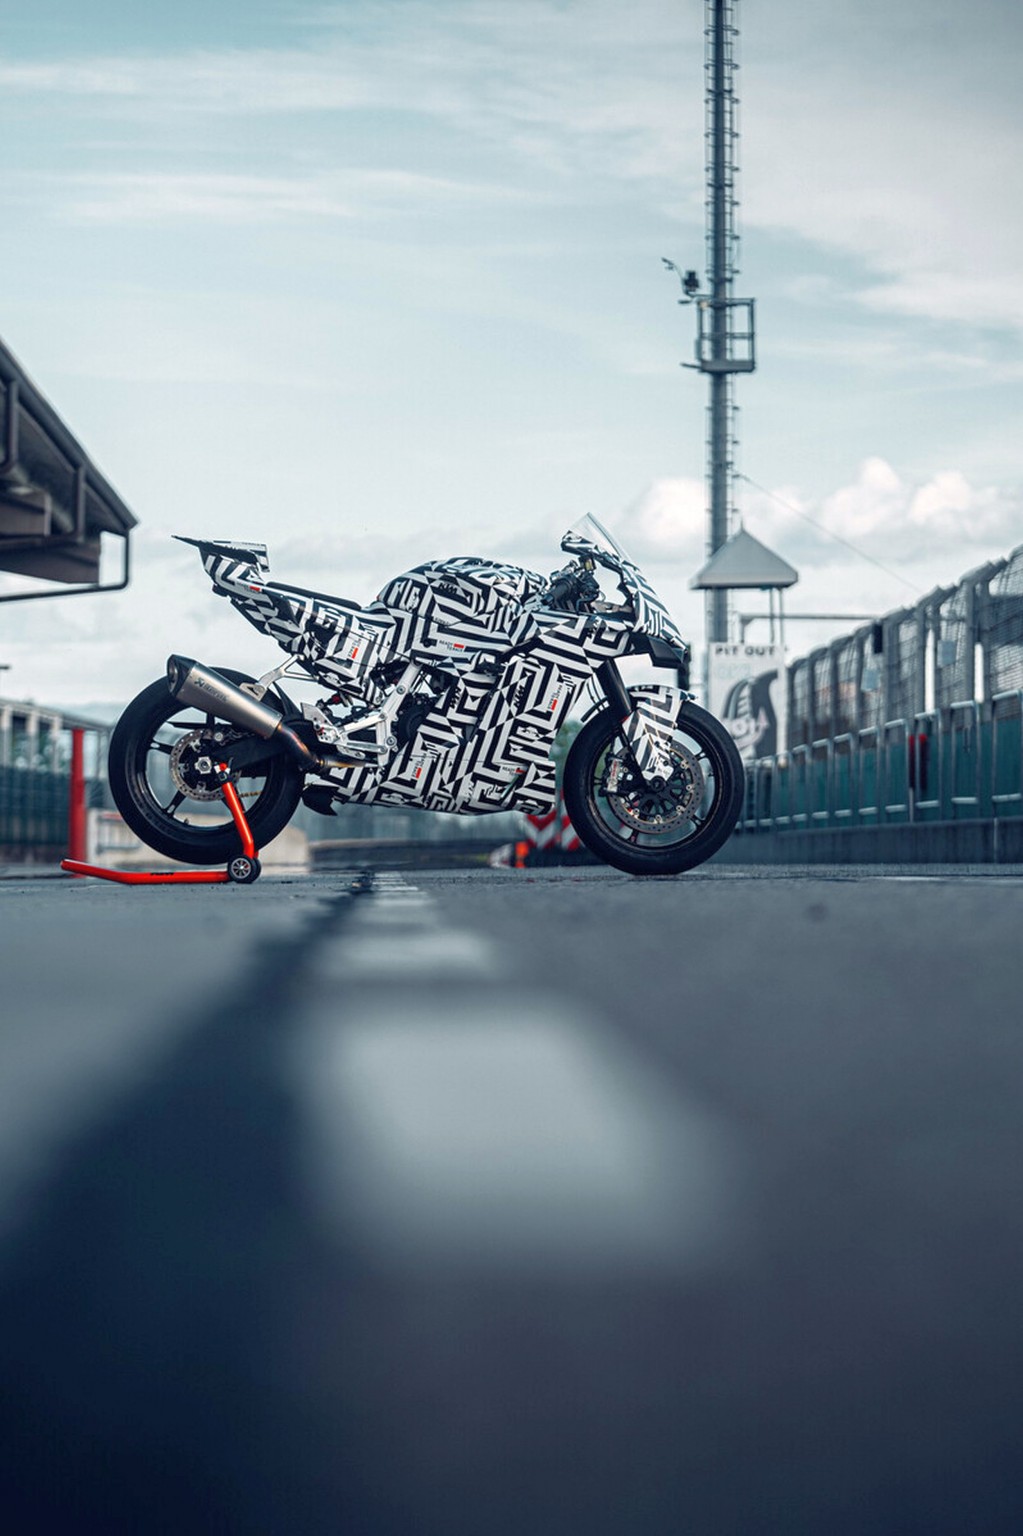 KTM 990 RC R - finally the thoroughbred sports bike for the road! - Image 22